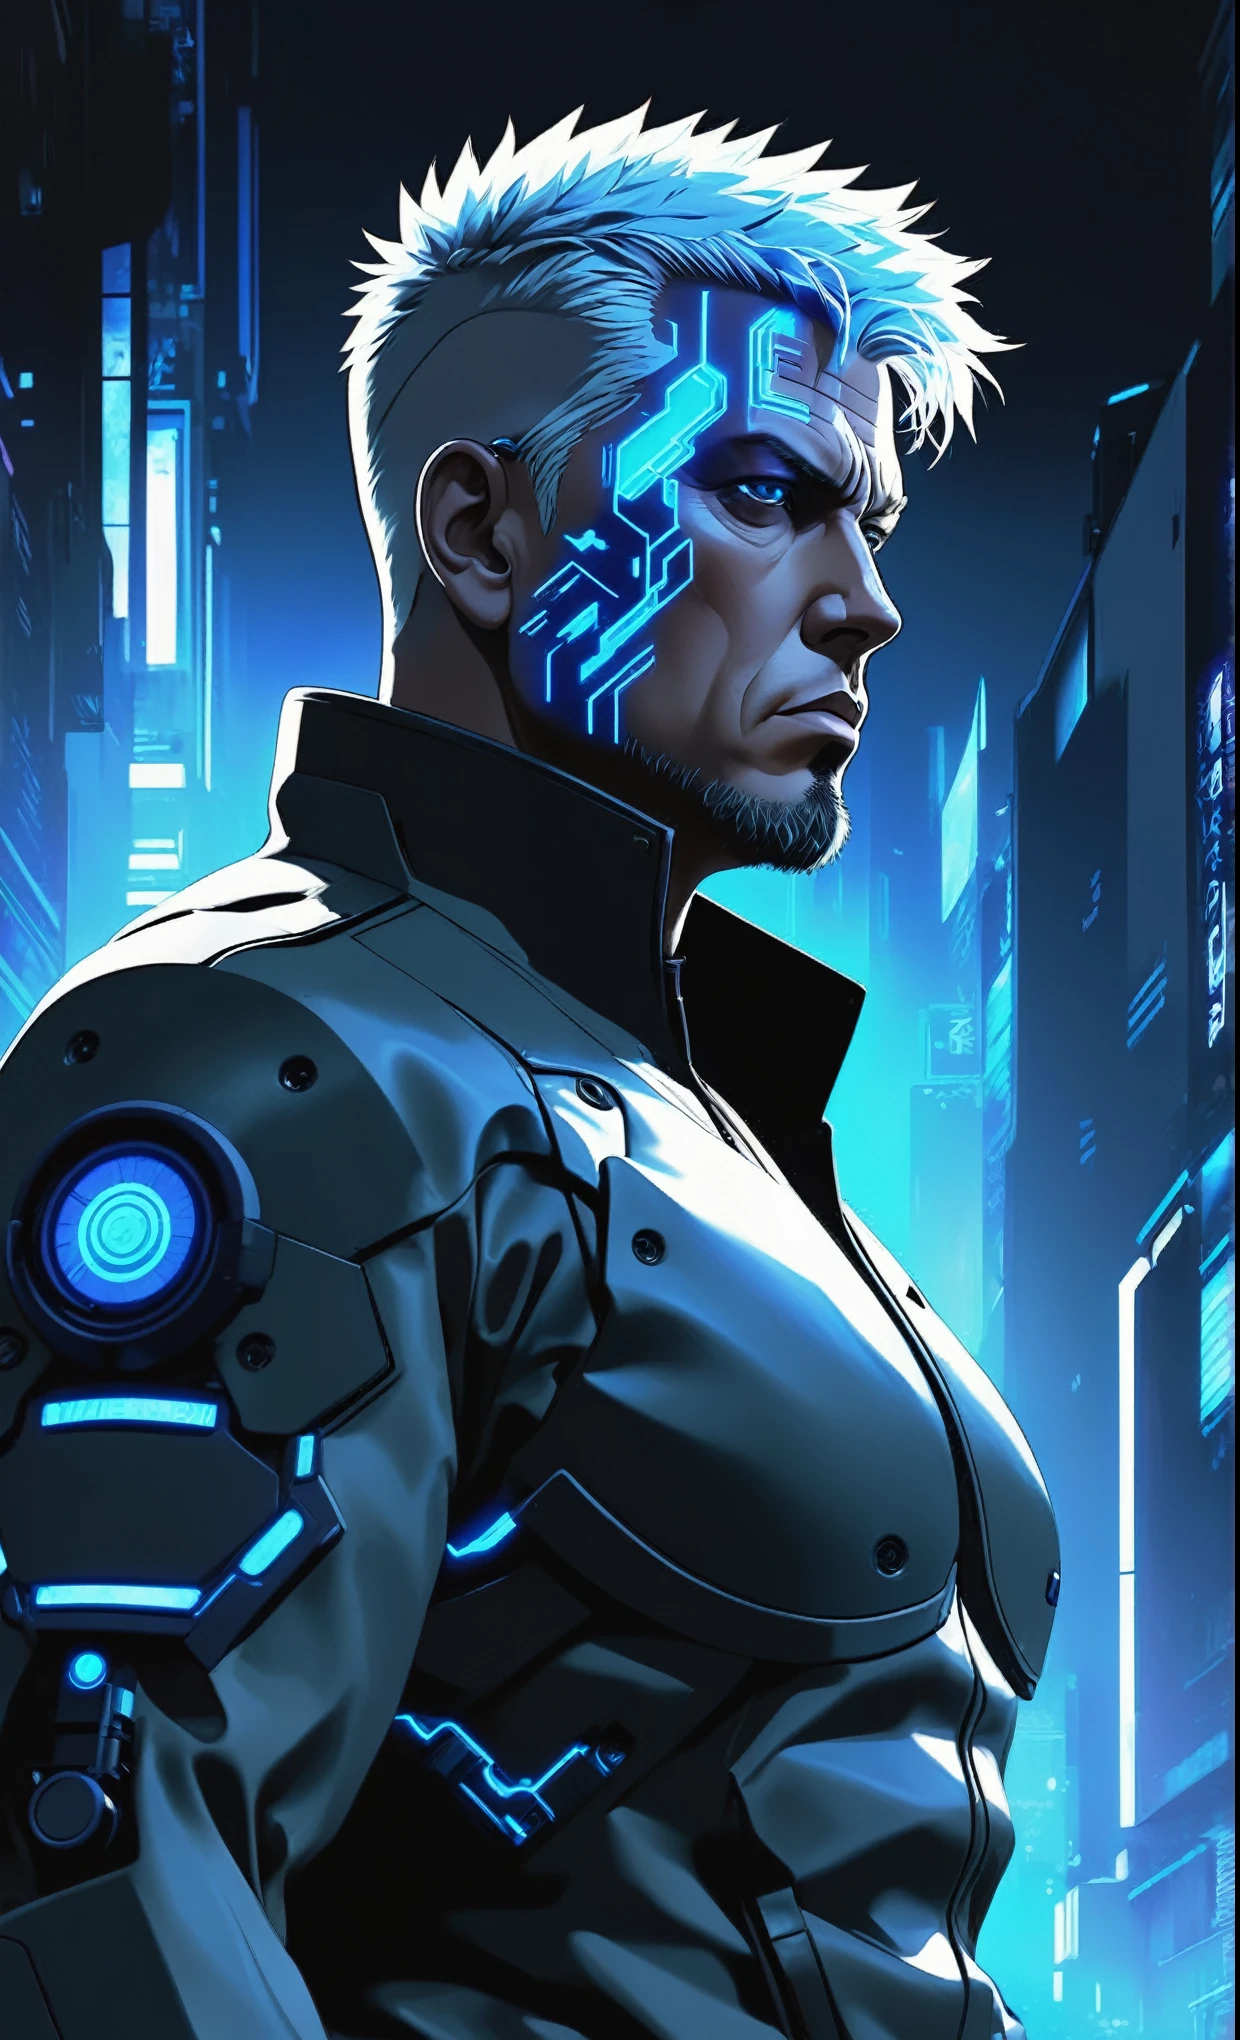 Ghost in the Shell Vol.2 - Batou, by Luis Duarte, Luis Duarte style, blue and black shading, Neo-Tokyo style, Element Air, Mythpunk, Graphic Interface, Sci-Fic Art, Dark Influence, NijiExpress 3D v3, Kinetic Art, Datanoshing, Oilpainting, Ink v3, Splash style, Abstract Art, Abstract Tech, Cyber Tech Elements, Futuristic, Illustrated v3, Deco Influence, AirBrush style, drawing